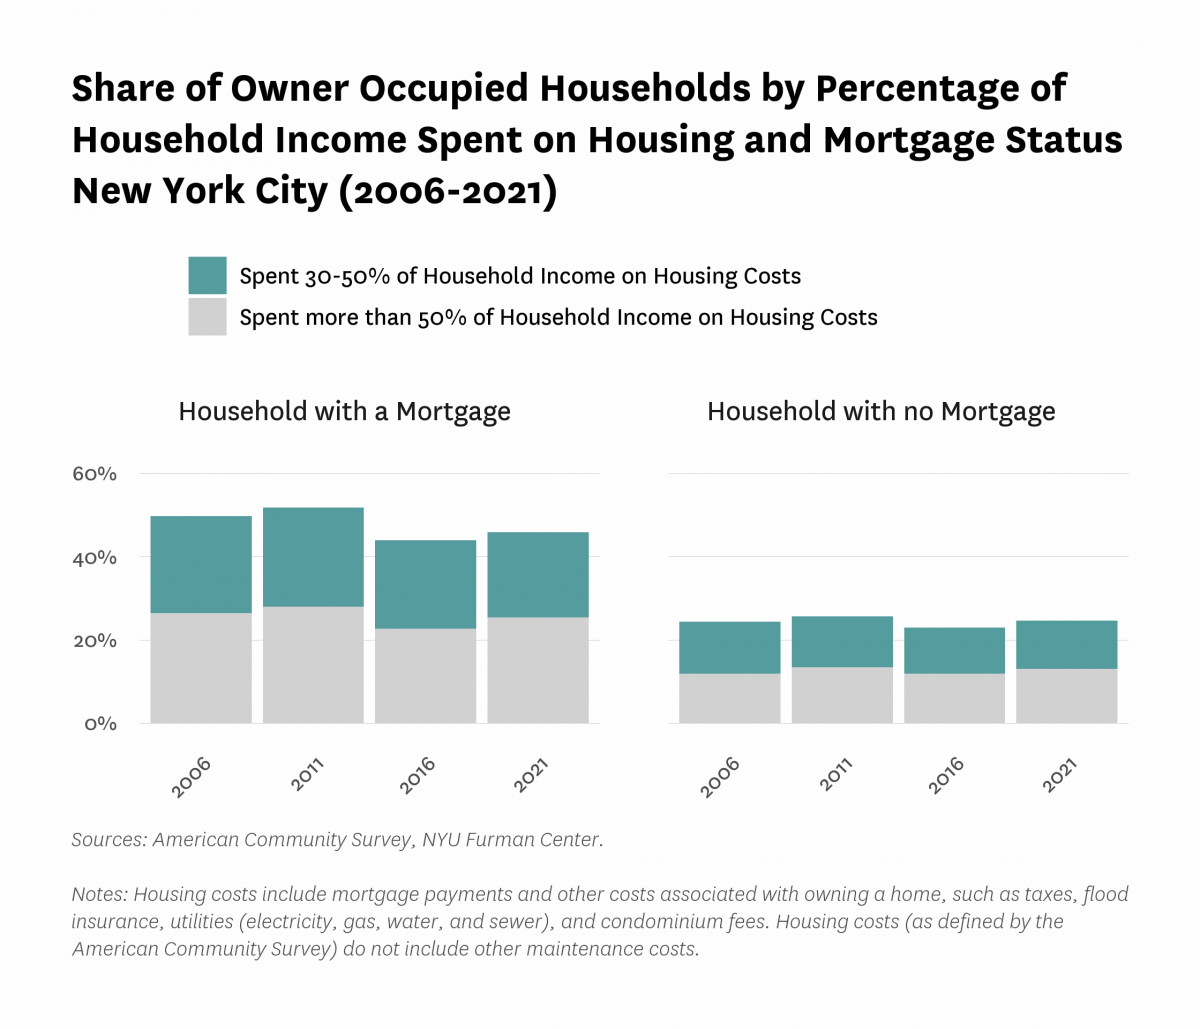 Area chart comparing the share of owner-occupied households by percentage of household income spent on housing and mortgage status in New York City between 2006 and 2021.